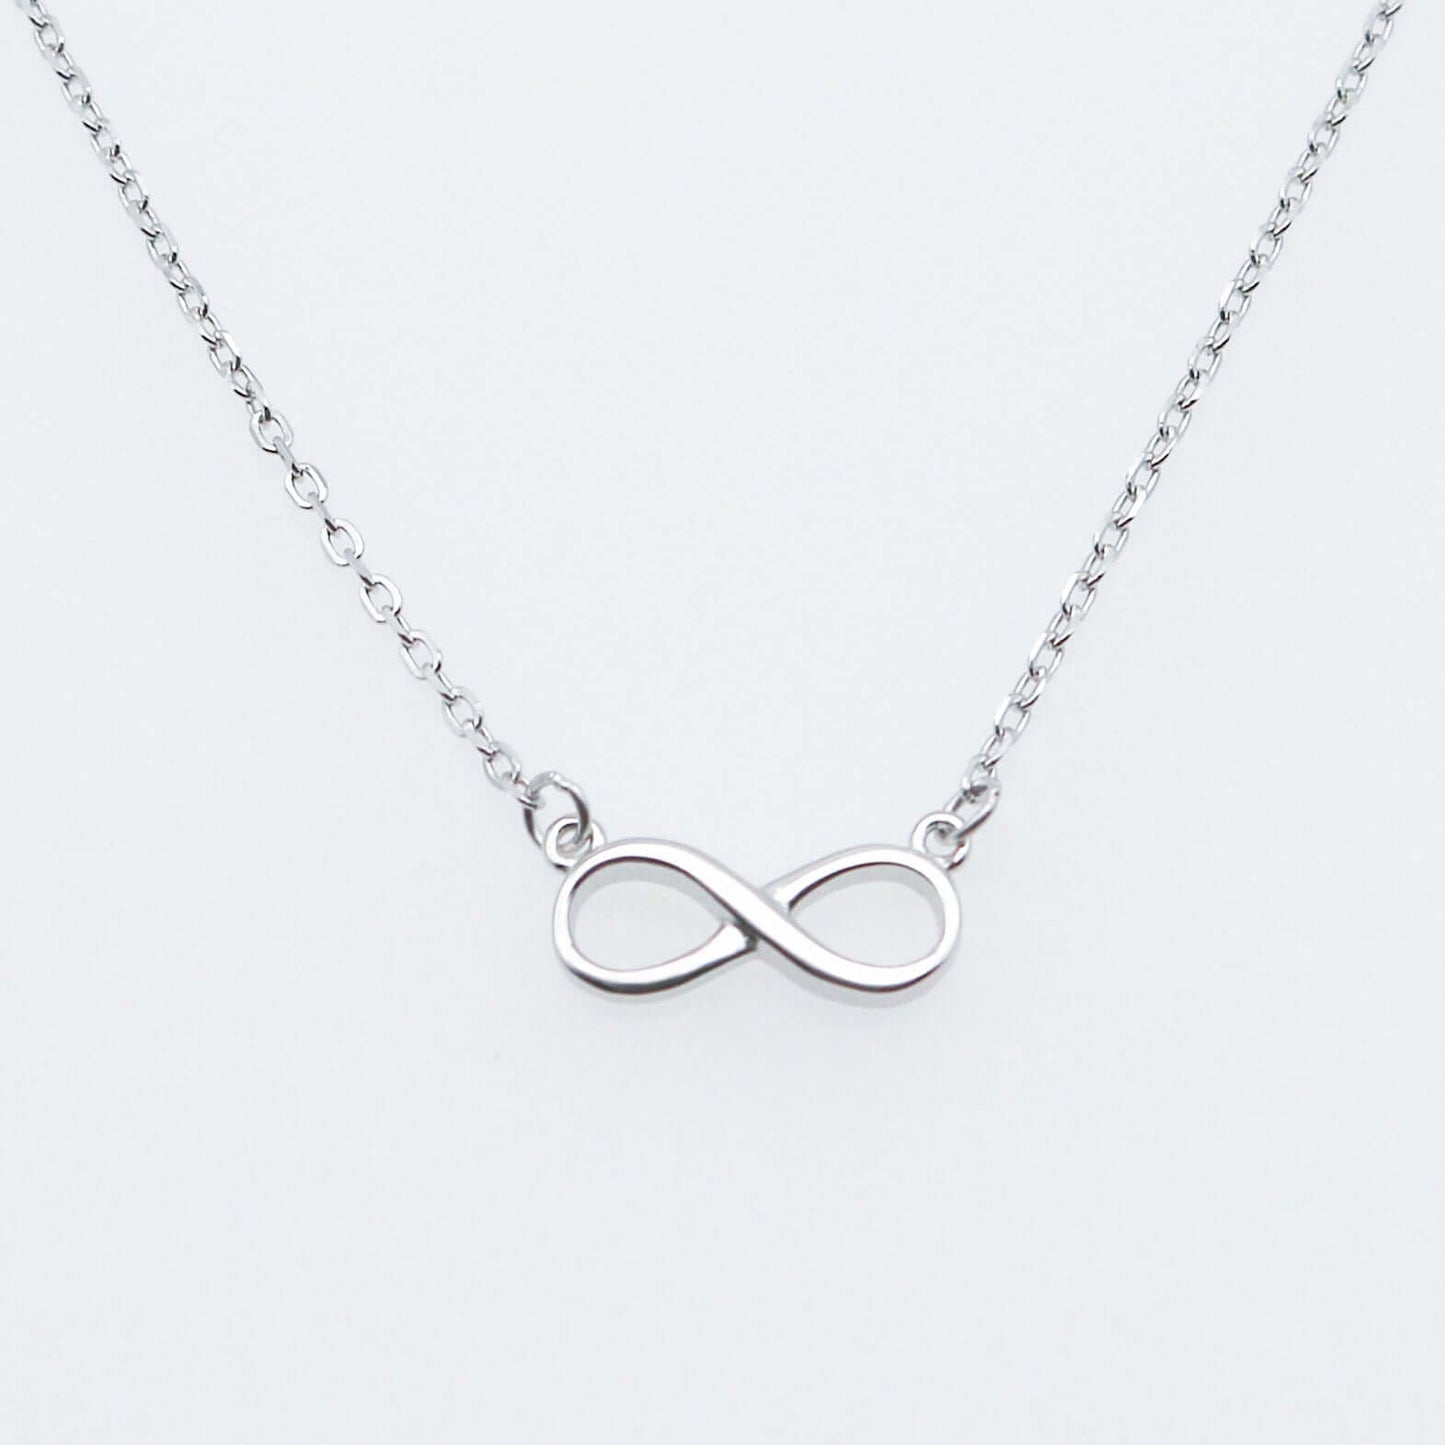 925 Silver women's necklace with infinity symbol